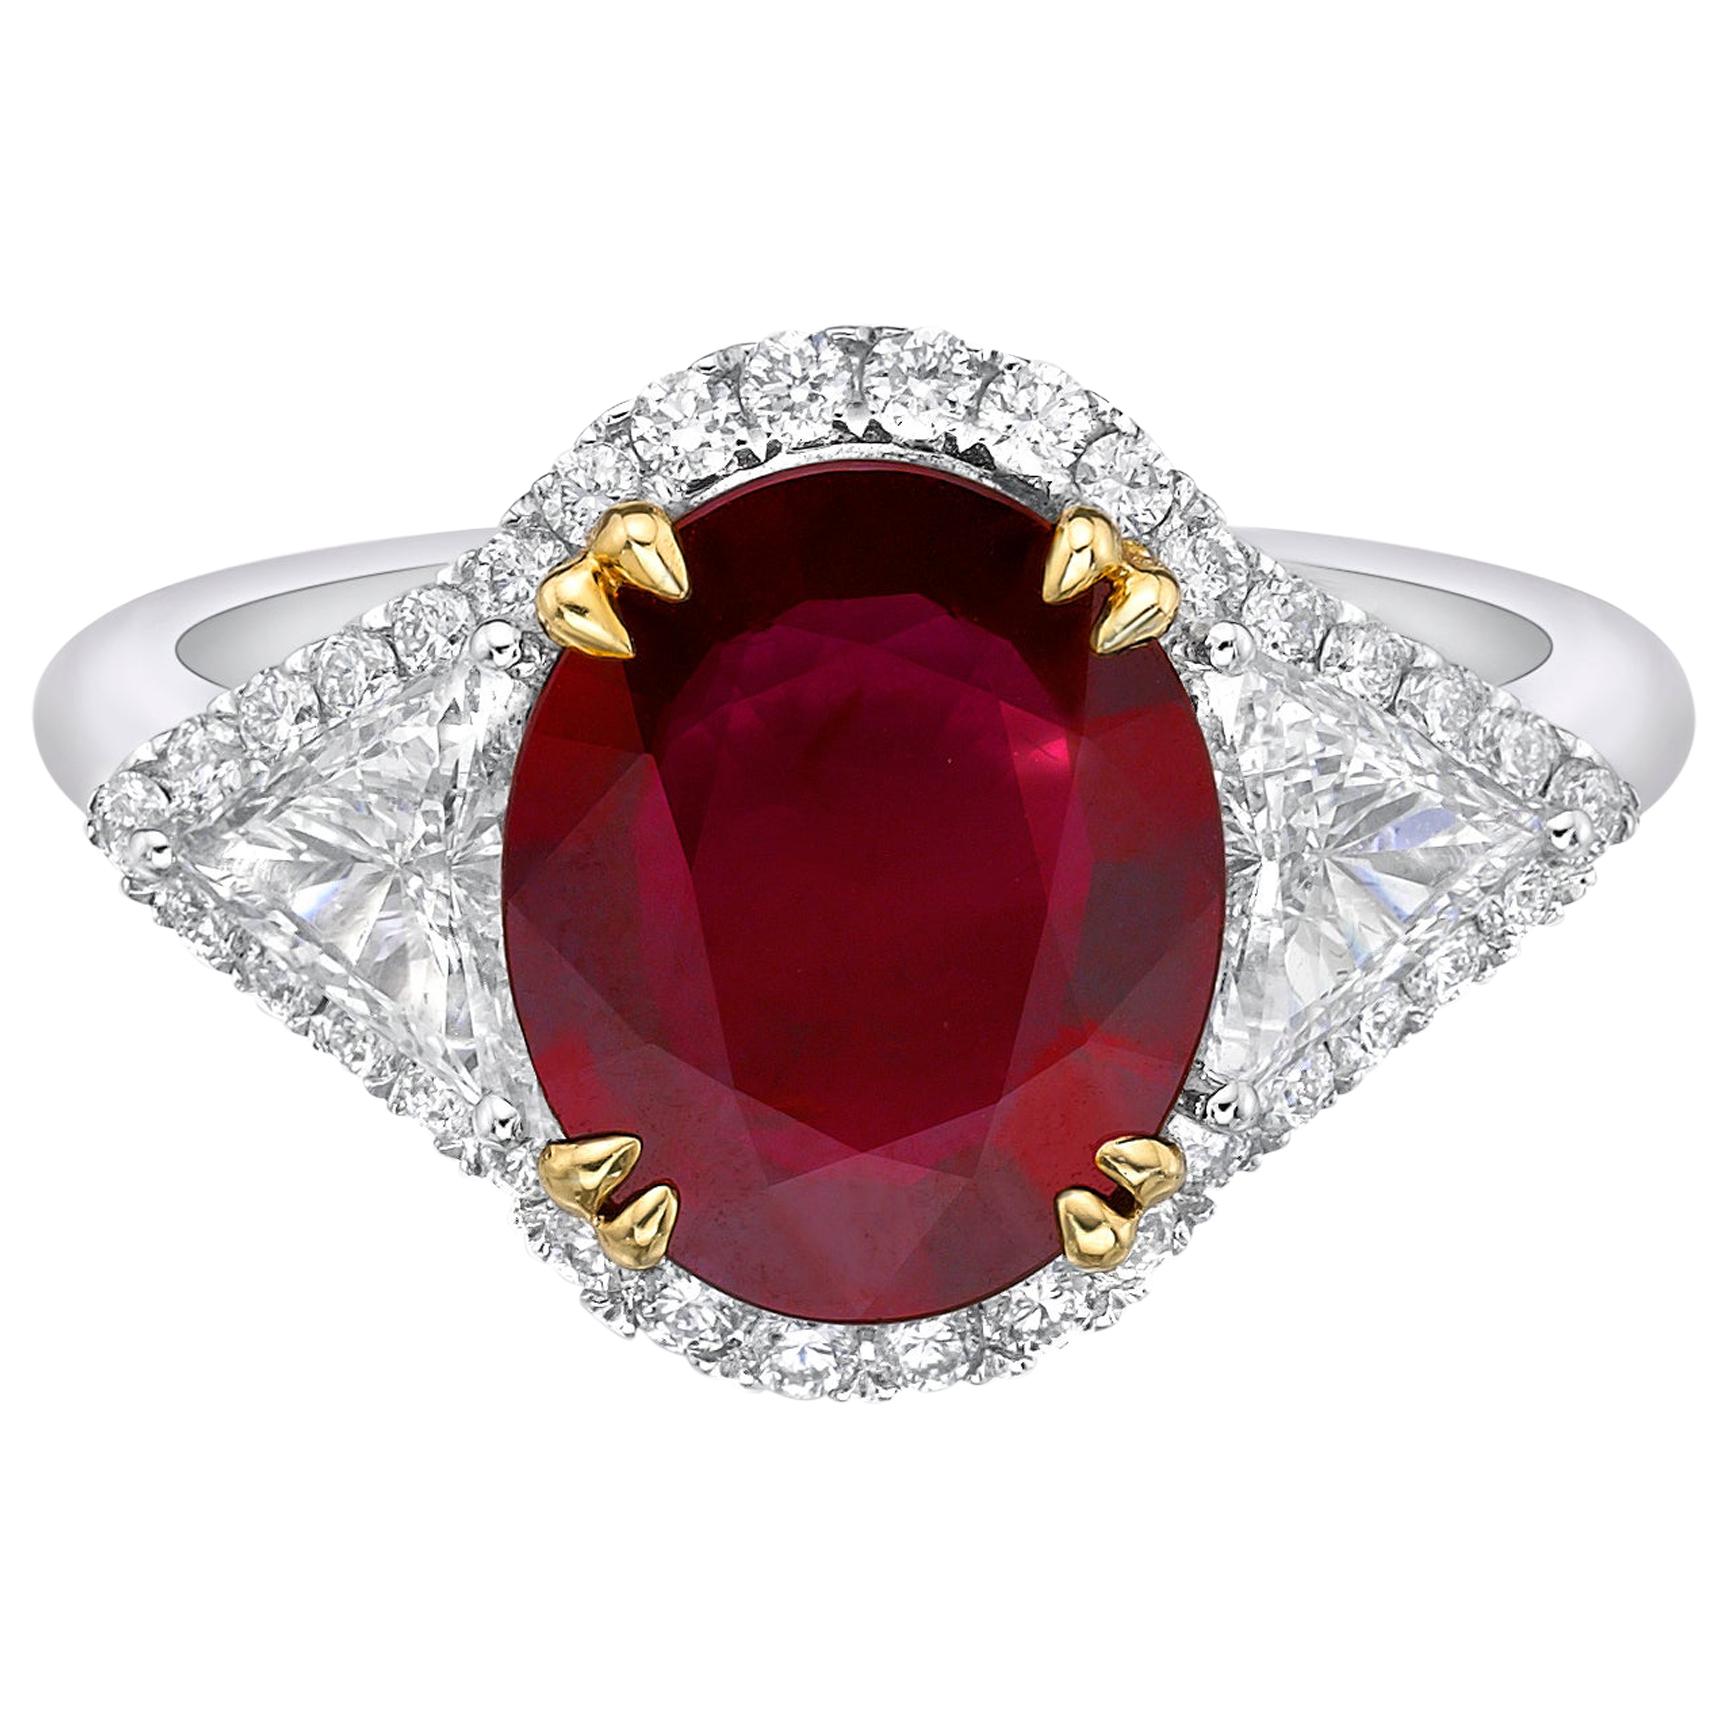 2.66 ct Unheated pigeon blood Ruby (Mozambique) Diamond Ring -GRS Certified